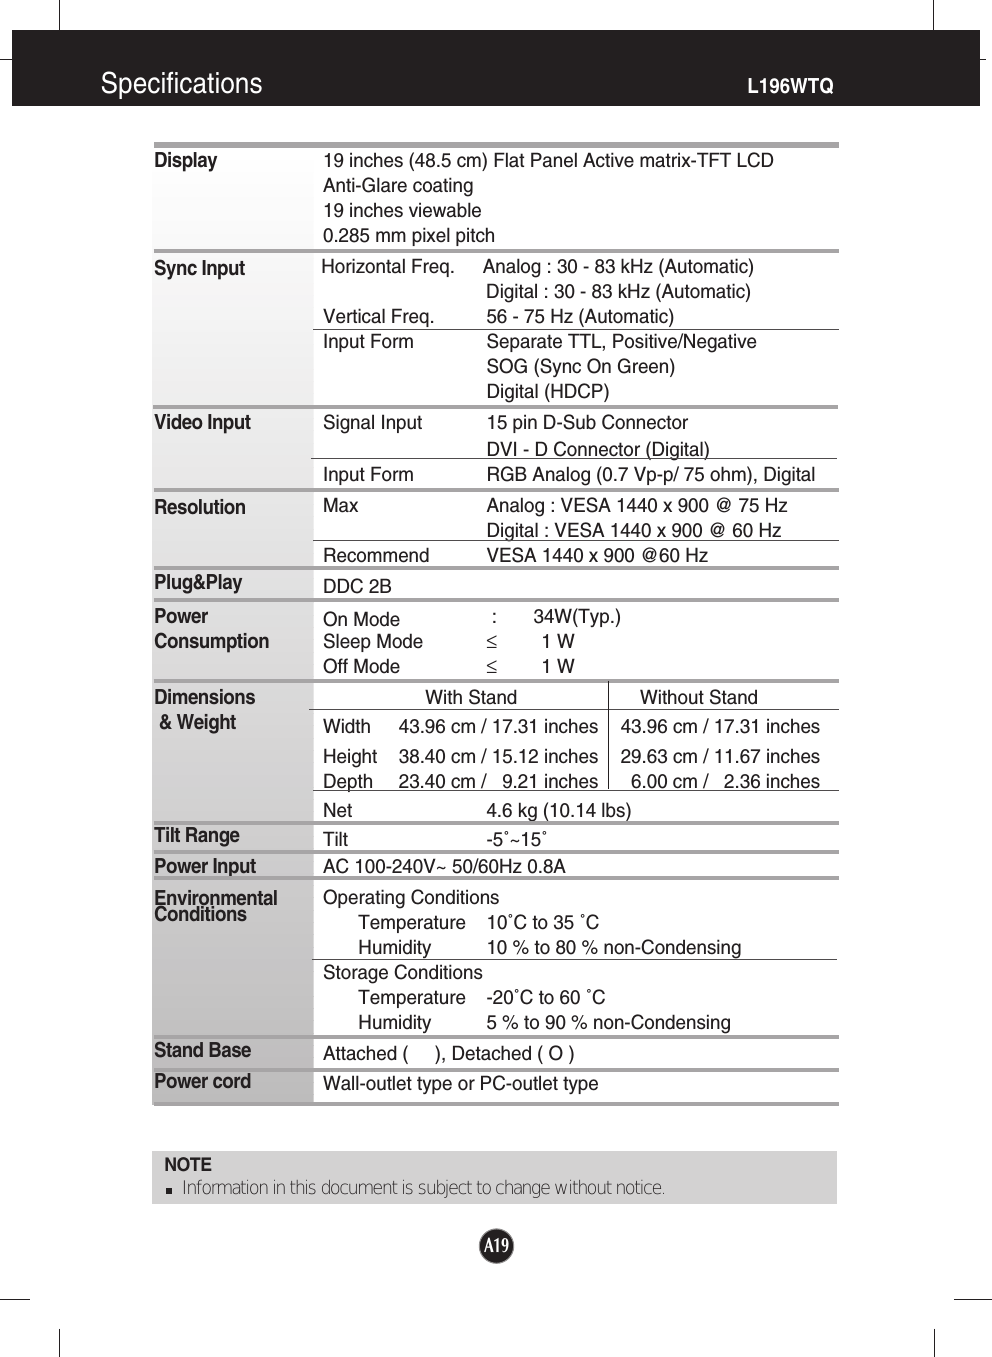 Specifications                                             L196WTQA19NOTEInformation in this document is subject to change without notice.DisplaySync InputVideo InputResolutionPlug&amp;PlayPowerConsumptionDimensions&amp; WeightTilt RangePower InputEnvironmentalConditionsStand BasePower cord 19 inches (48.5 cm) Flat Panel Active matrix-TFT LCD Anti-Glare coating19 inches viewable0.285 mm pixel pitchHorizontal Freq. Analog : 30 - 83 kHz (Automatic)Digital : 30 - 83 kHz (Automatic)Vertical Freq. 56 - 75 Hz (Automatic)Input Form Separate TTL, Positive/NegativeSOG (Sync On Green) Digital (HDCP)Signal Input 15 pin D-Sub ConnectorDVI - D Connector (Digital)Input Form RGB Analog (0.7 Vp-p/ 75 ohm), DigitalMax Analog : VESA 1440 x 900 @ 75 HzDigital : VESA 1440 x 900 @ 60 HzRecommend VESA 1440 x 900 @60 HzDDC 2BOn Mode : 34W(Typ.)Sleep Mode ≤1 WOff Mode ≤1 WWith Stand Without StandWidth 43.96 cm / 17.31 inches 43.96 cm / 17.31 inchesHeight 38.40 cm / 15.12 inches 29.63 cm / 11.67 inches Depth 23.40 cm /   9.21 inches 6.00 cm /   2.36 inchesNet 4.6 kg (10.14 lbs)Tilt -5˚~15˚AC 100-240V~ 50/60Hz 0.8A Operating ConditionsTemperature 10˚C to 35 ˚CHumidity 10 % to 80 % non-CondensingStorage ConditionsTemperature -20˚C to 60 ˚CHumidity 5 % to 90 % non-CondensingAttached (     ), Detached ( O )Wall-outlet type or PC-outlet type